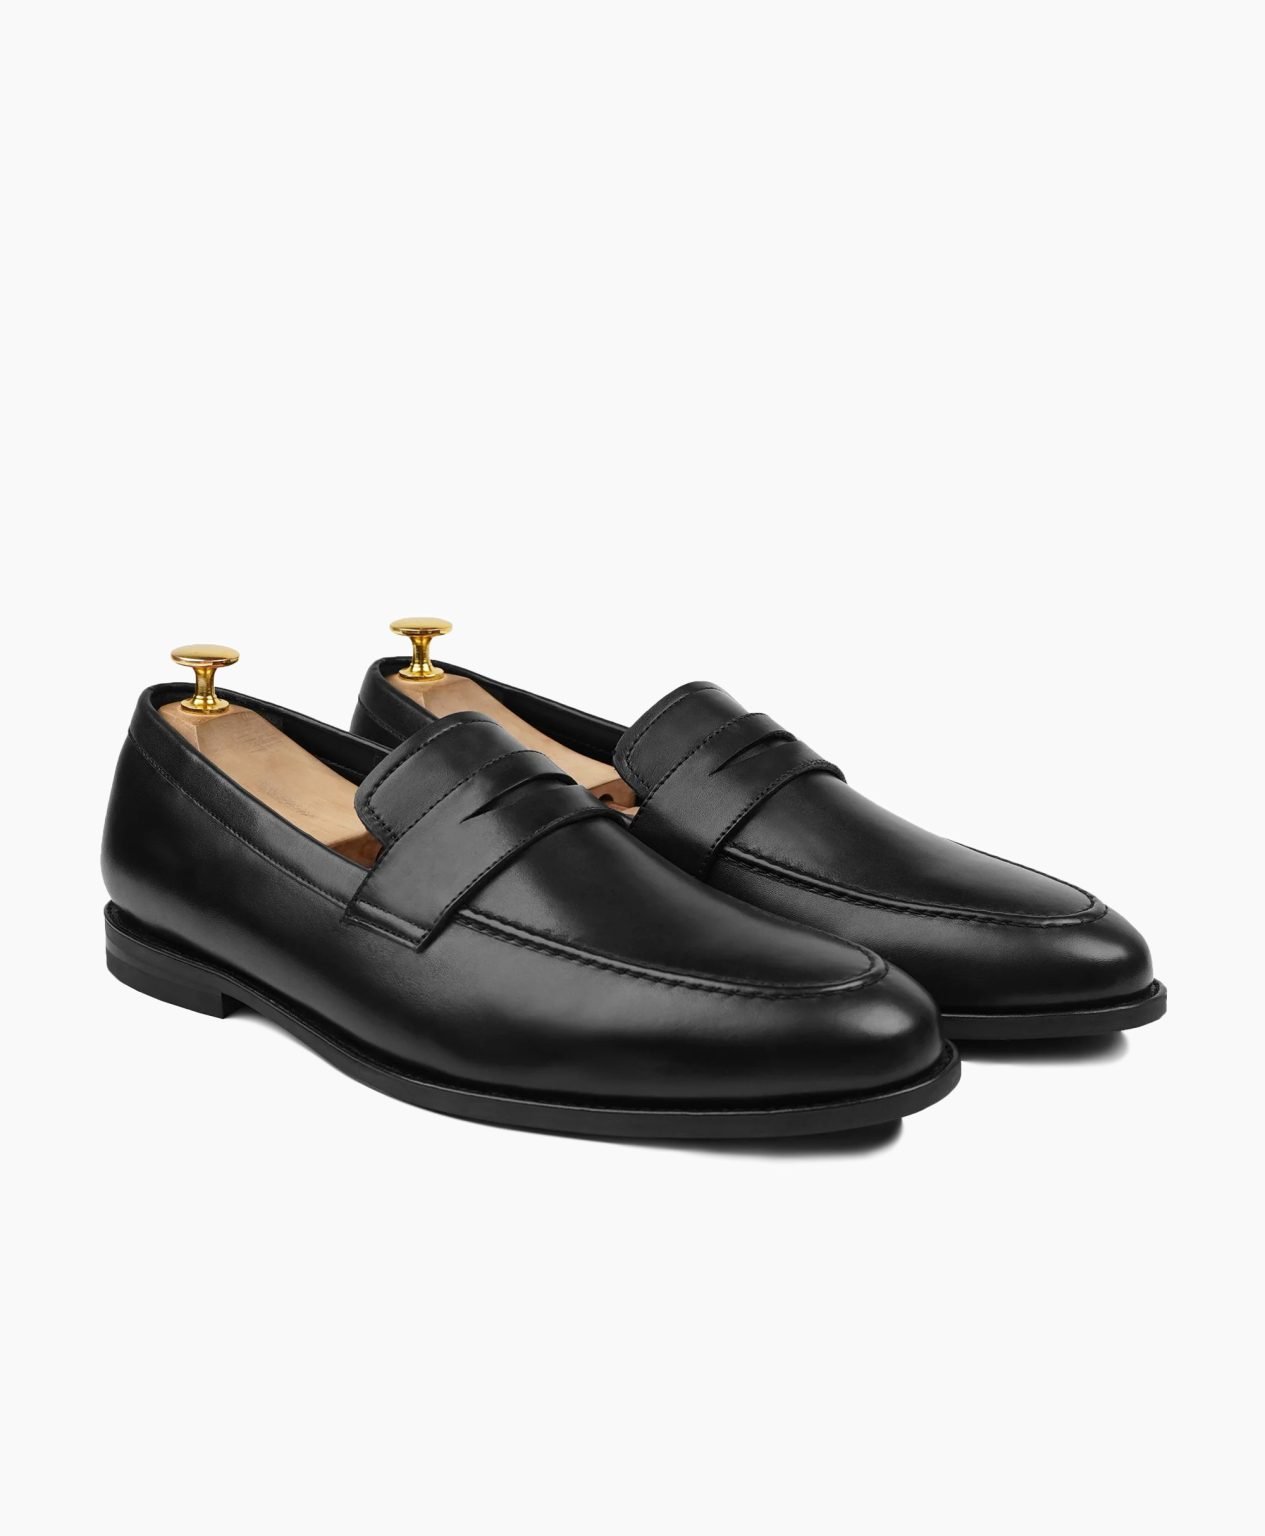 crediton-black-leather-loafers-image200